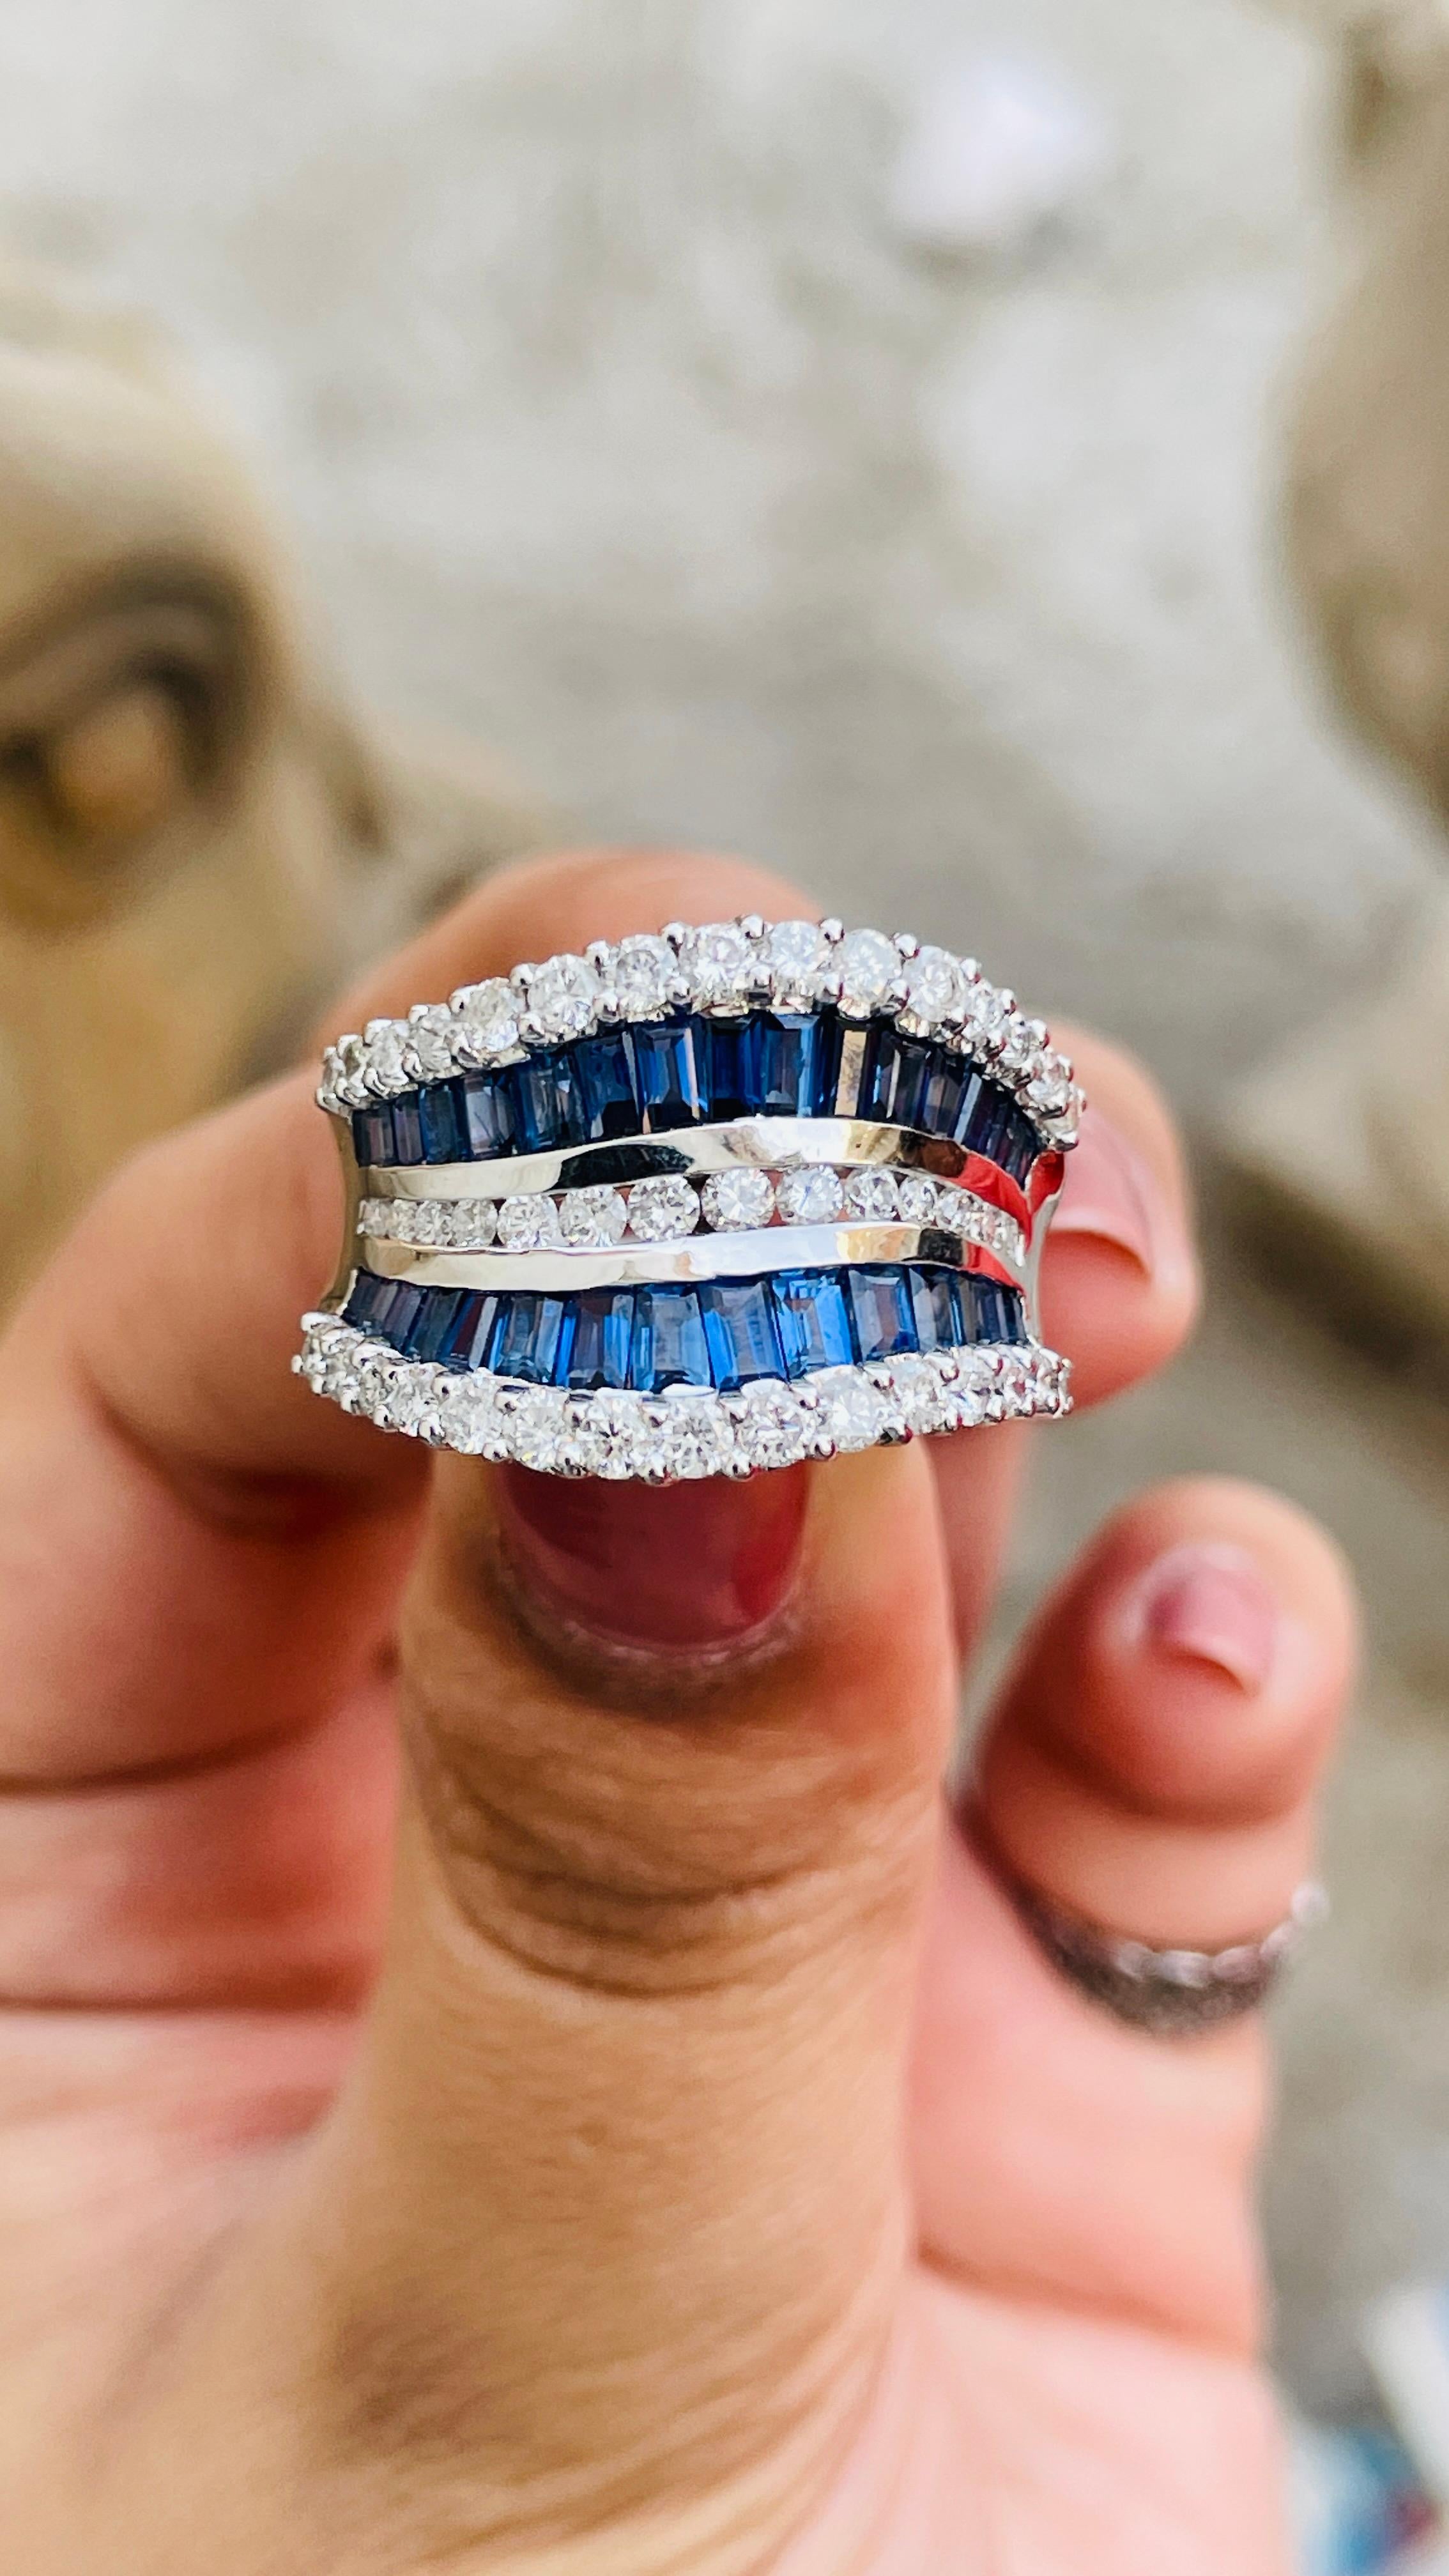 For Sale:  2.65 Carat Blue Sapphire and Diamond Cocktail Ring in 14 Karat White Gold 2